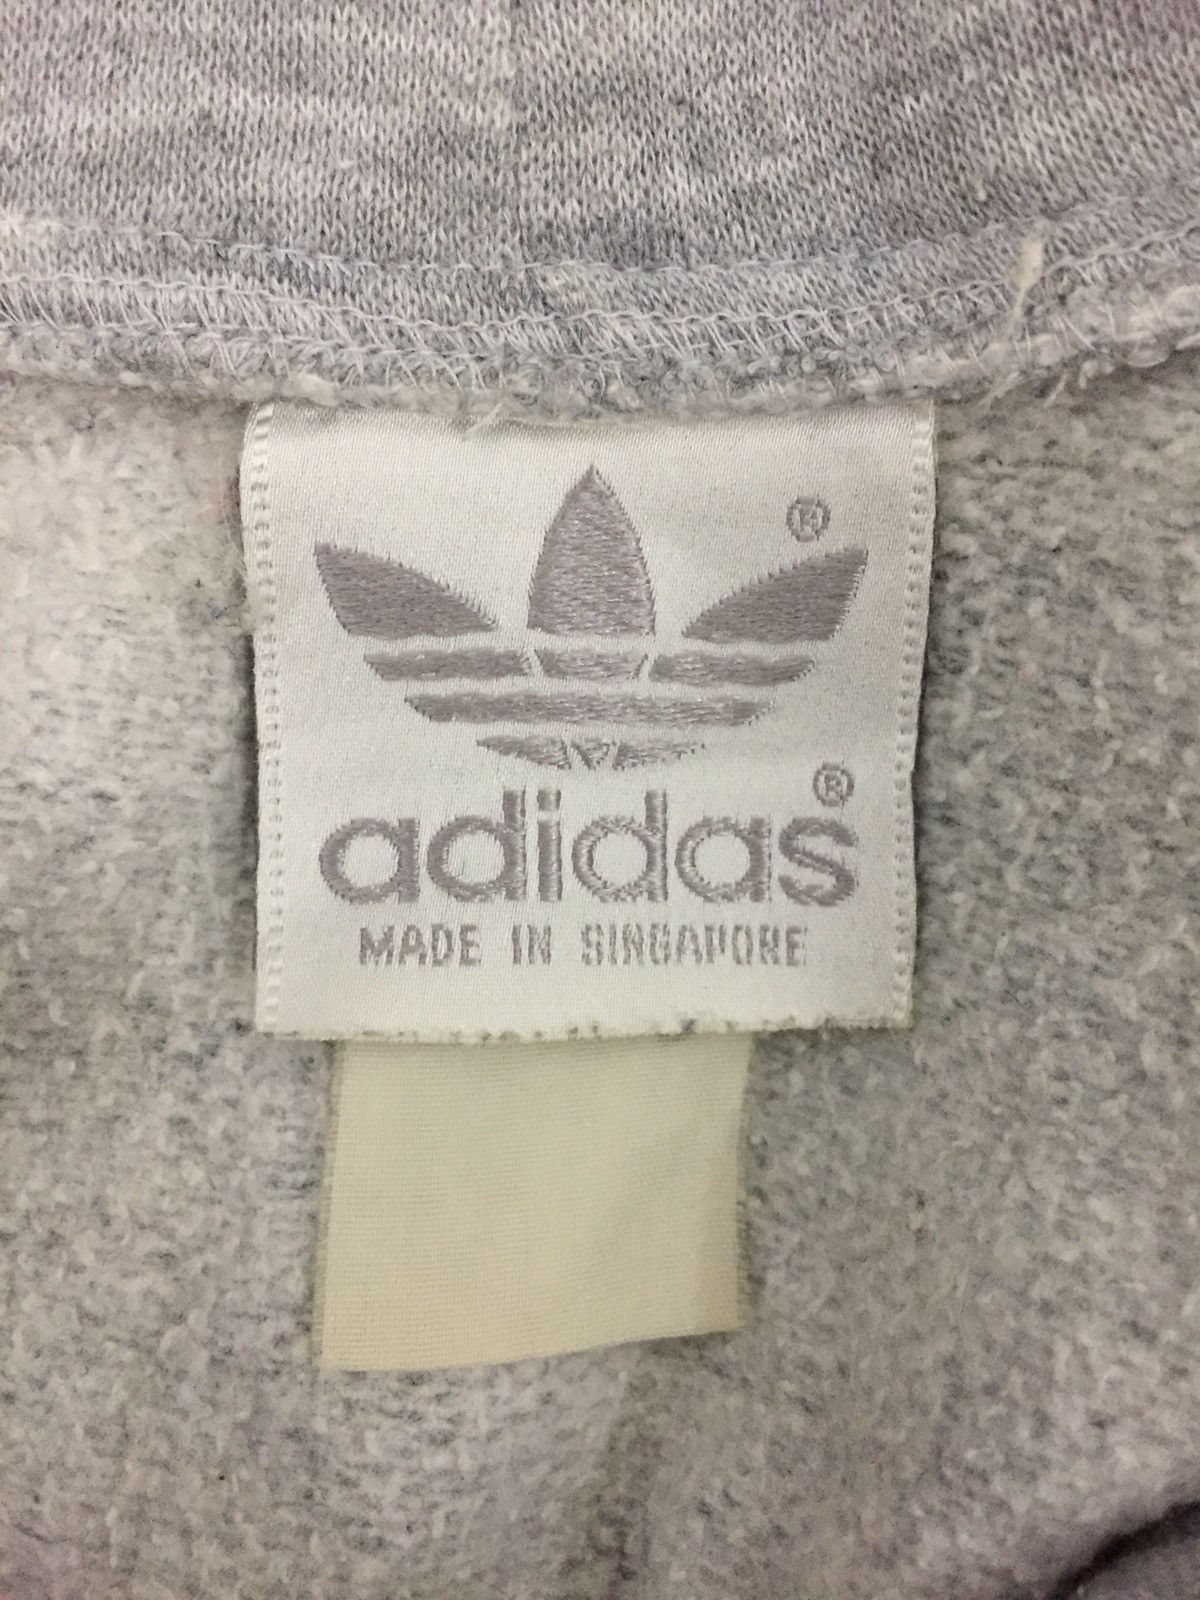 Adidas Adidas Zip Up Hoodie Size US L / EU 52-54 / 3 - 5 Preview